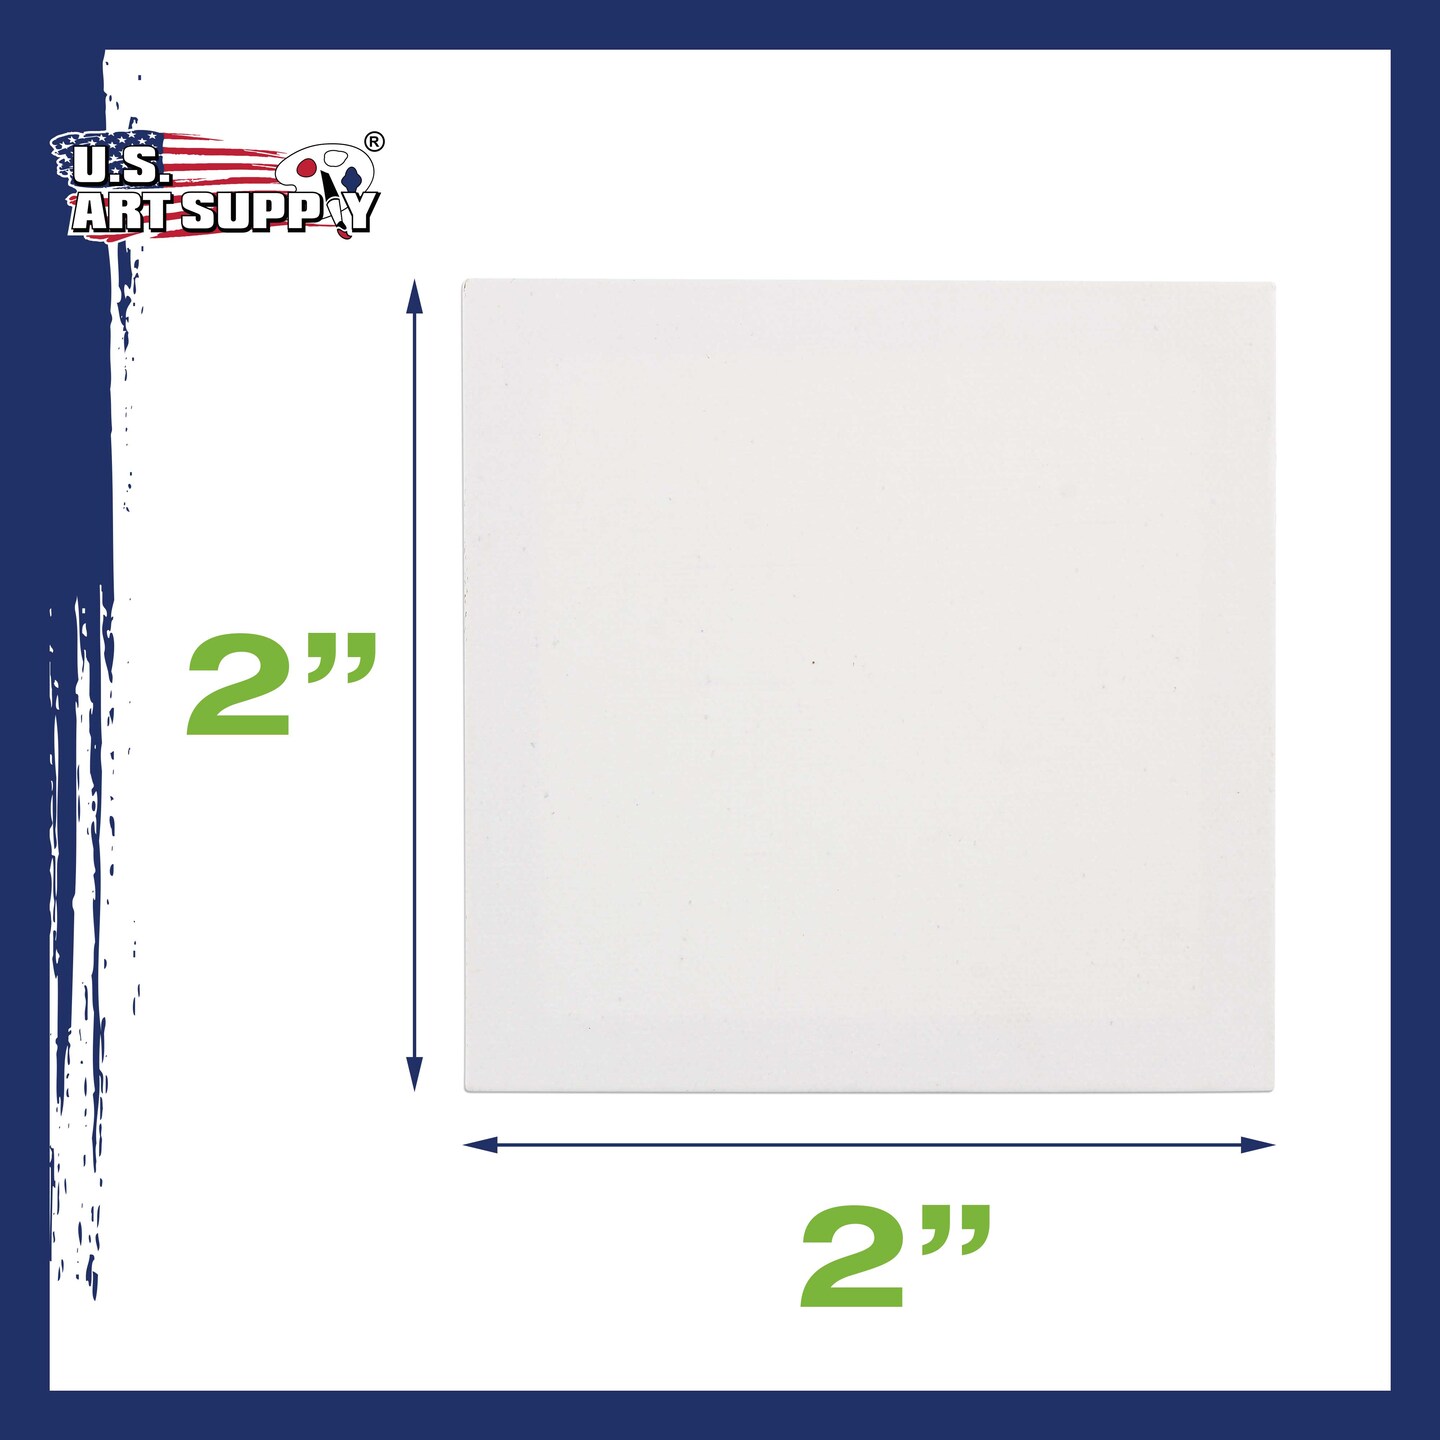 2&#x22; x 2&#x22; Mini Professional Primed Stretched Canvas 72-Pack